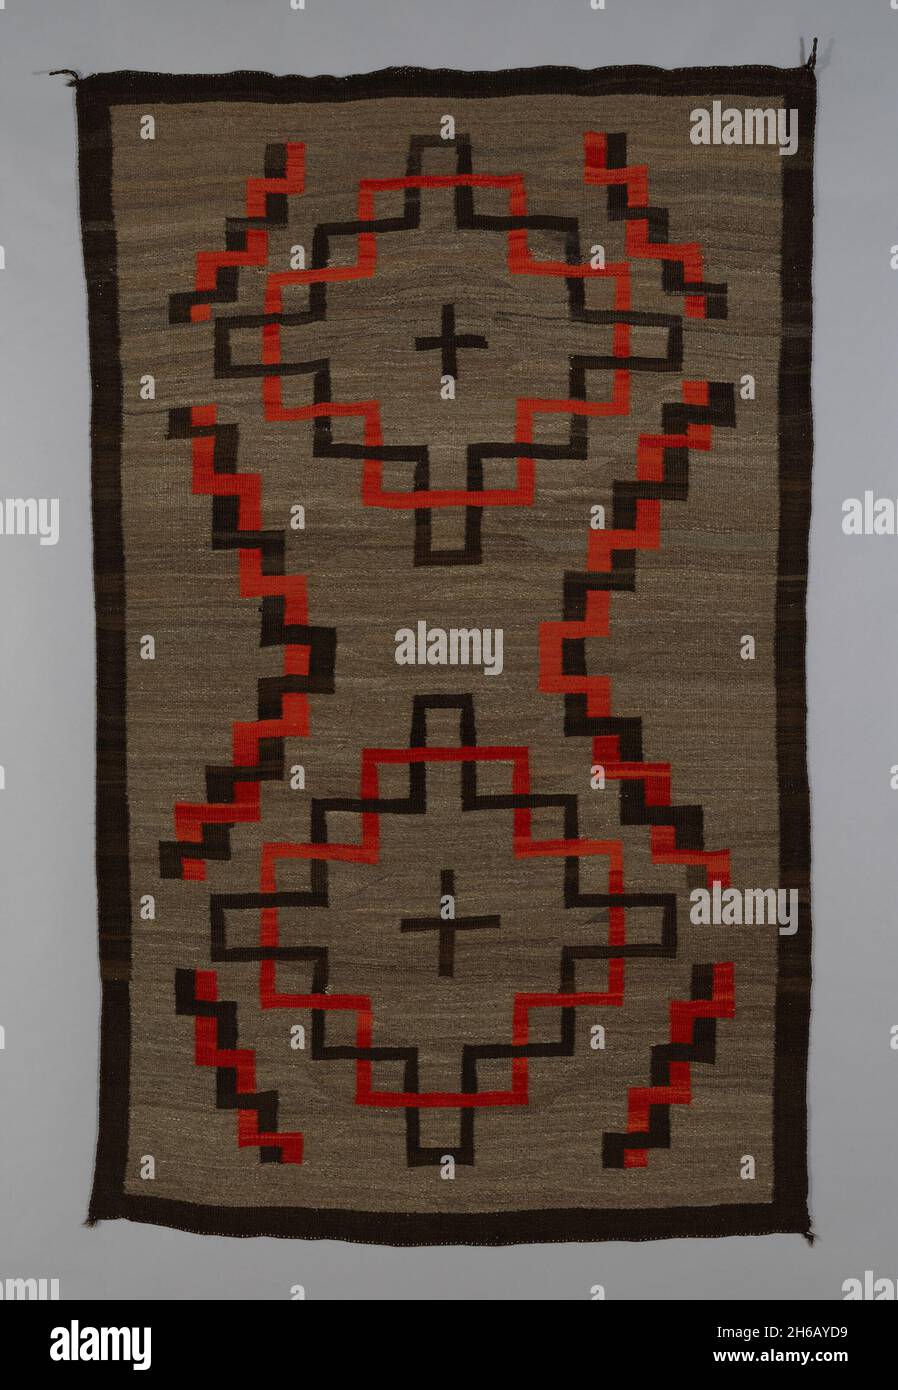 Blanket or Rug, United States, c. 1900 (Transitional Period). Stock Photo